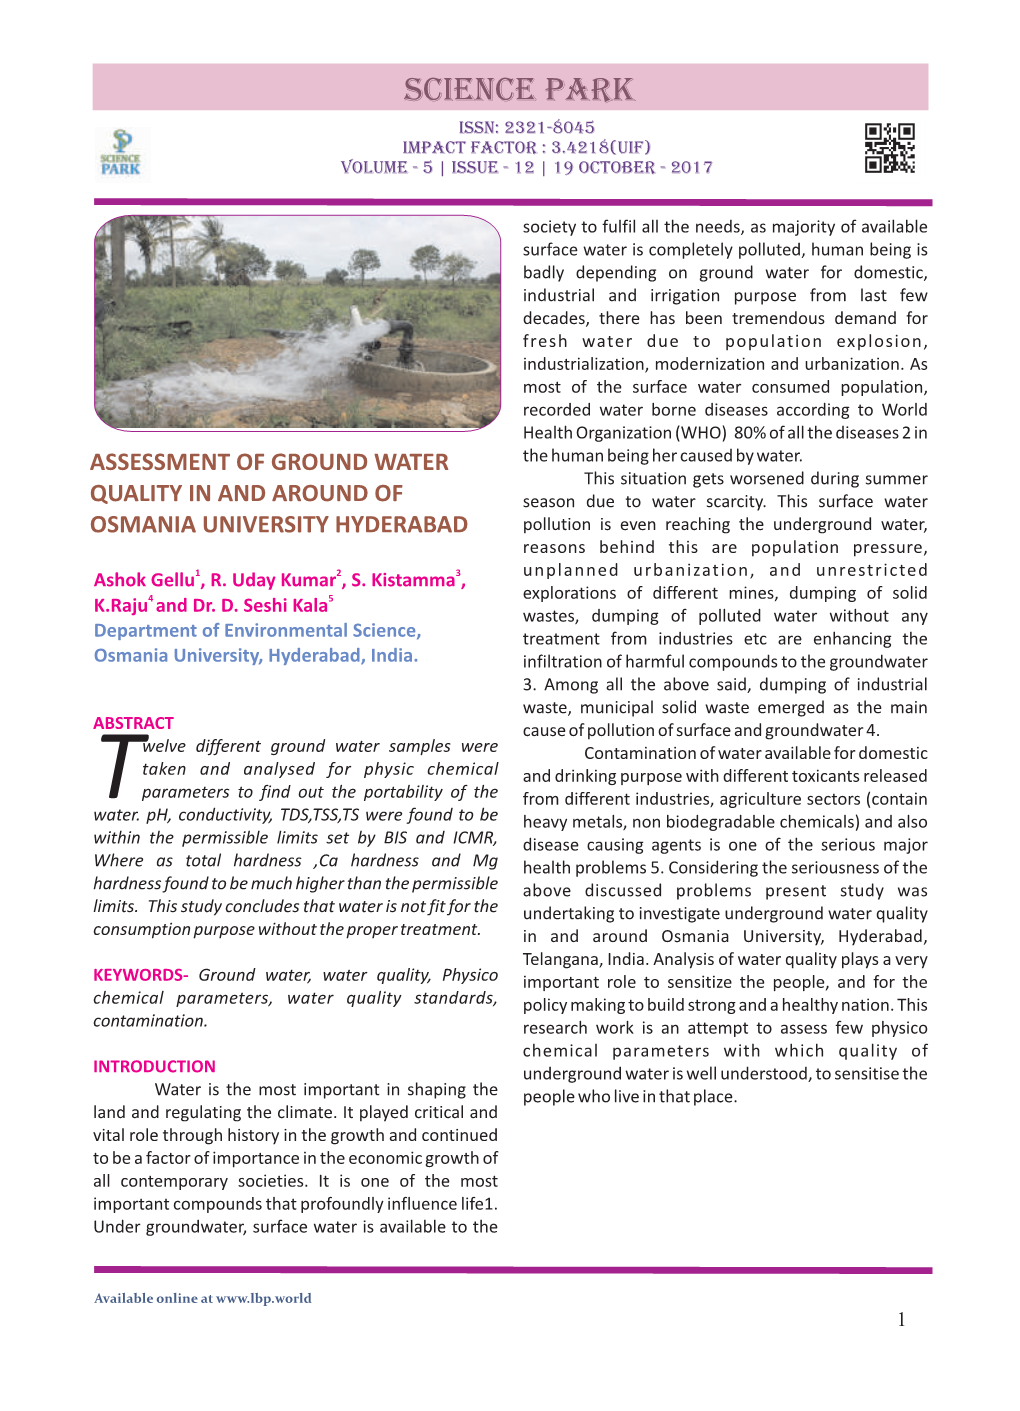 Assessment of Ground Water Quality in and Around of Osmania University Hyderabad